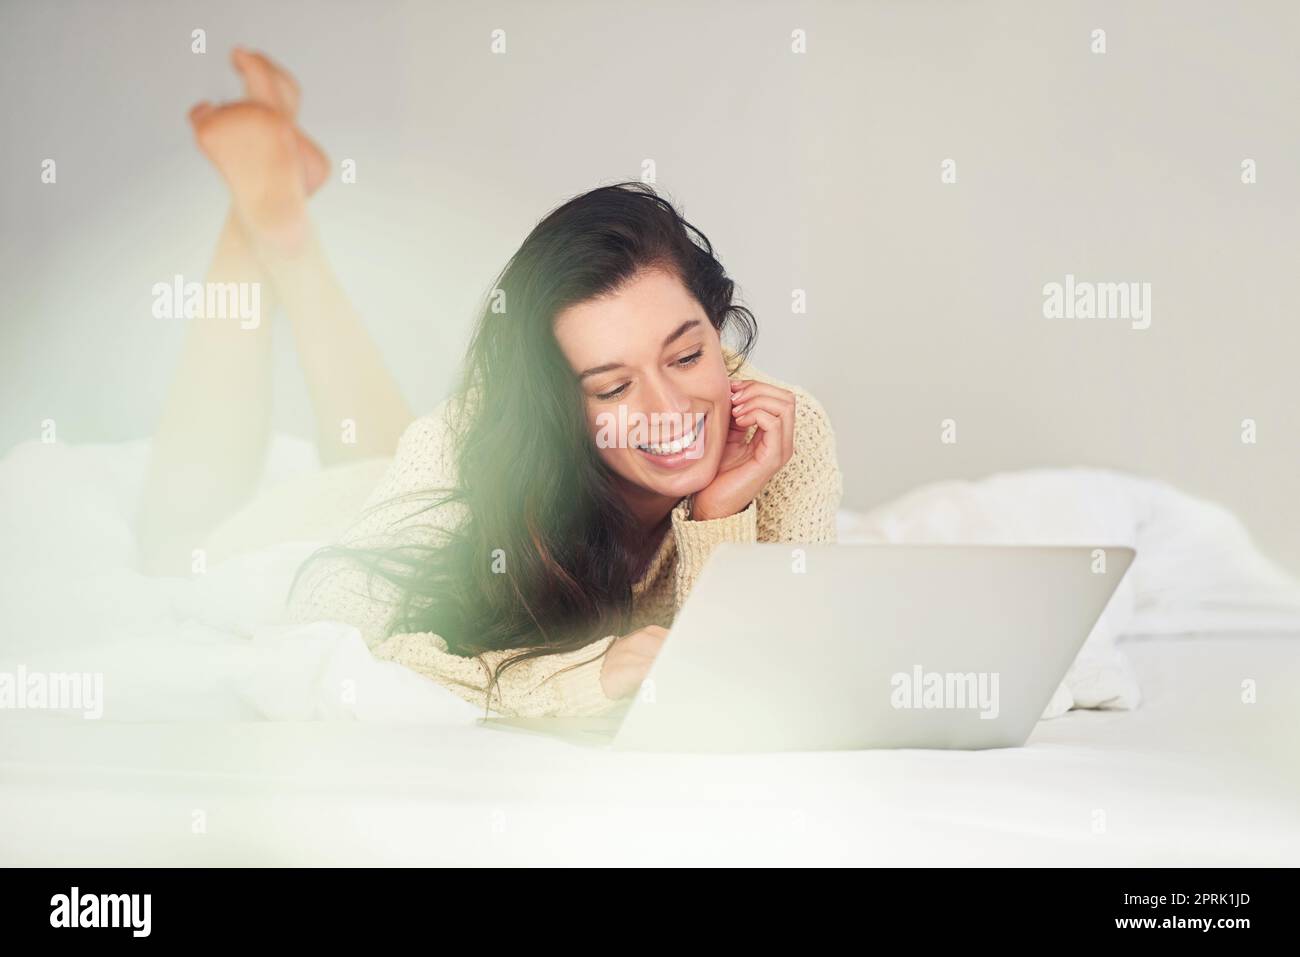 She loves blogging. a young woman using her laptop while lying on her bed. Stock Photo